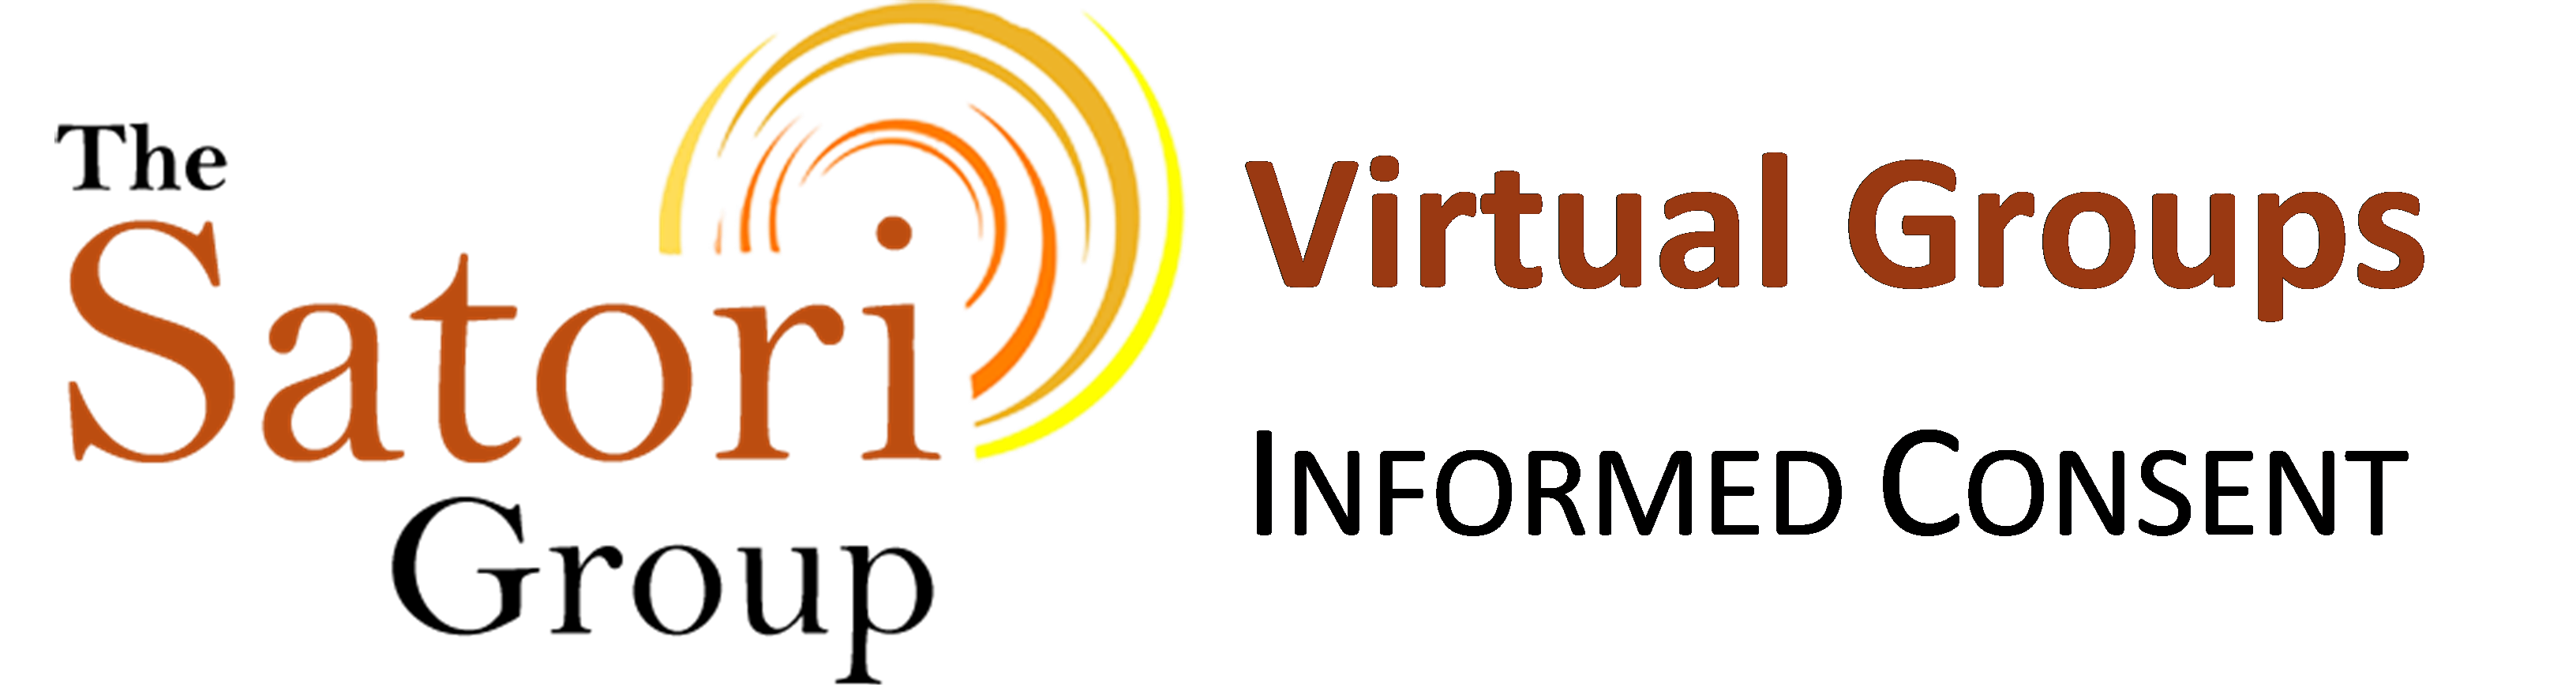 Virtual Support Group Resources Image